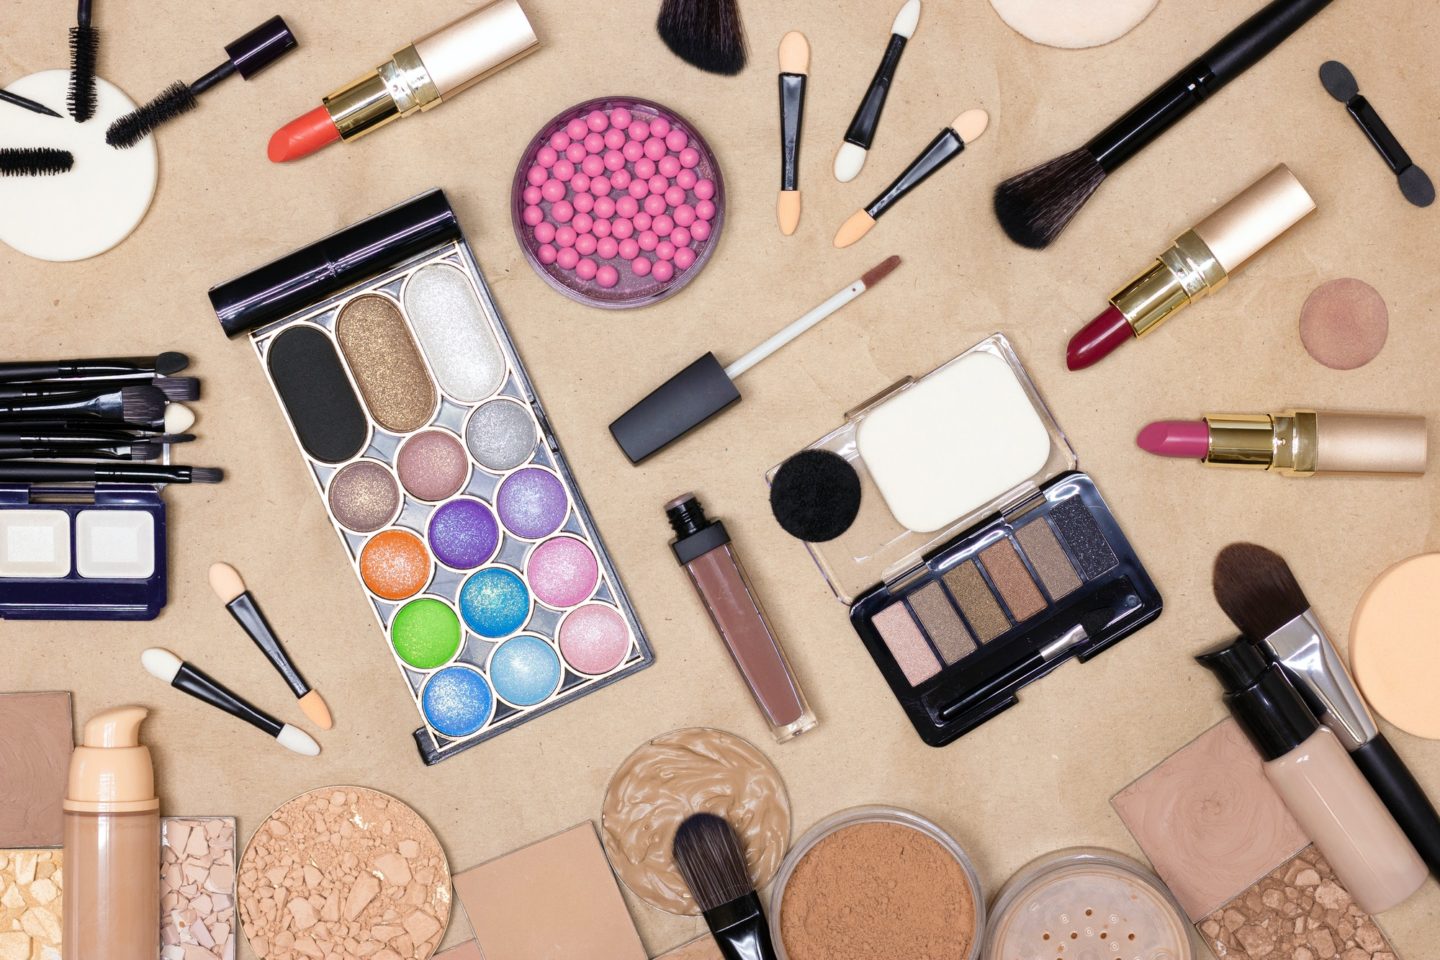 Makeup products and accessories on make-up table